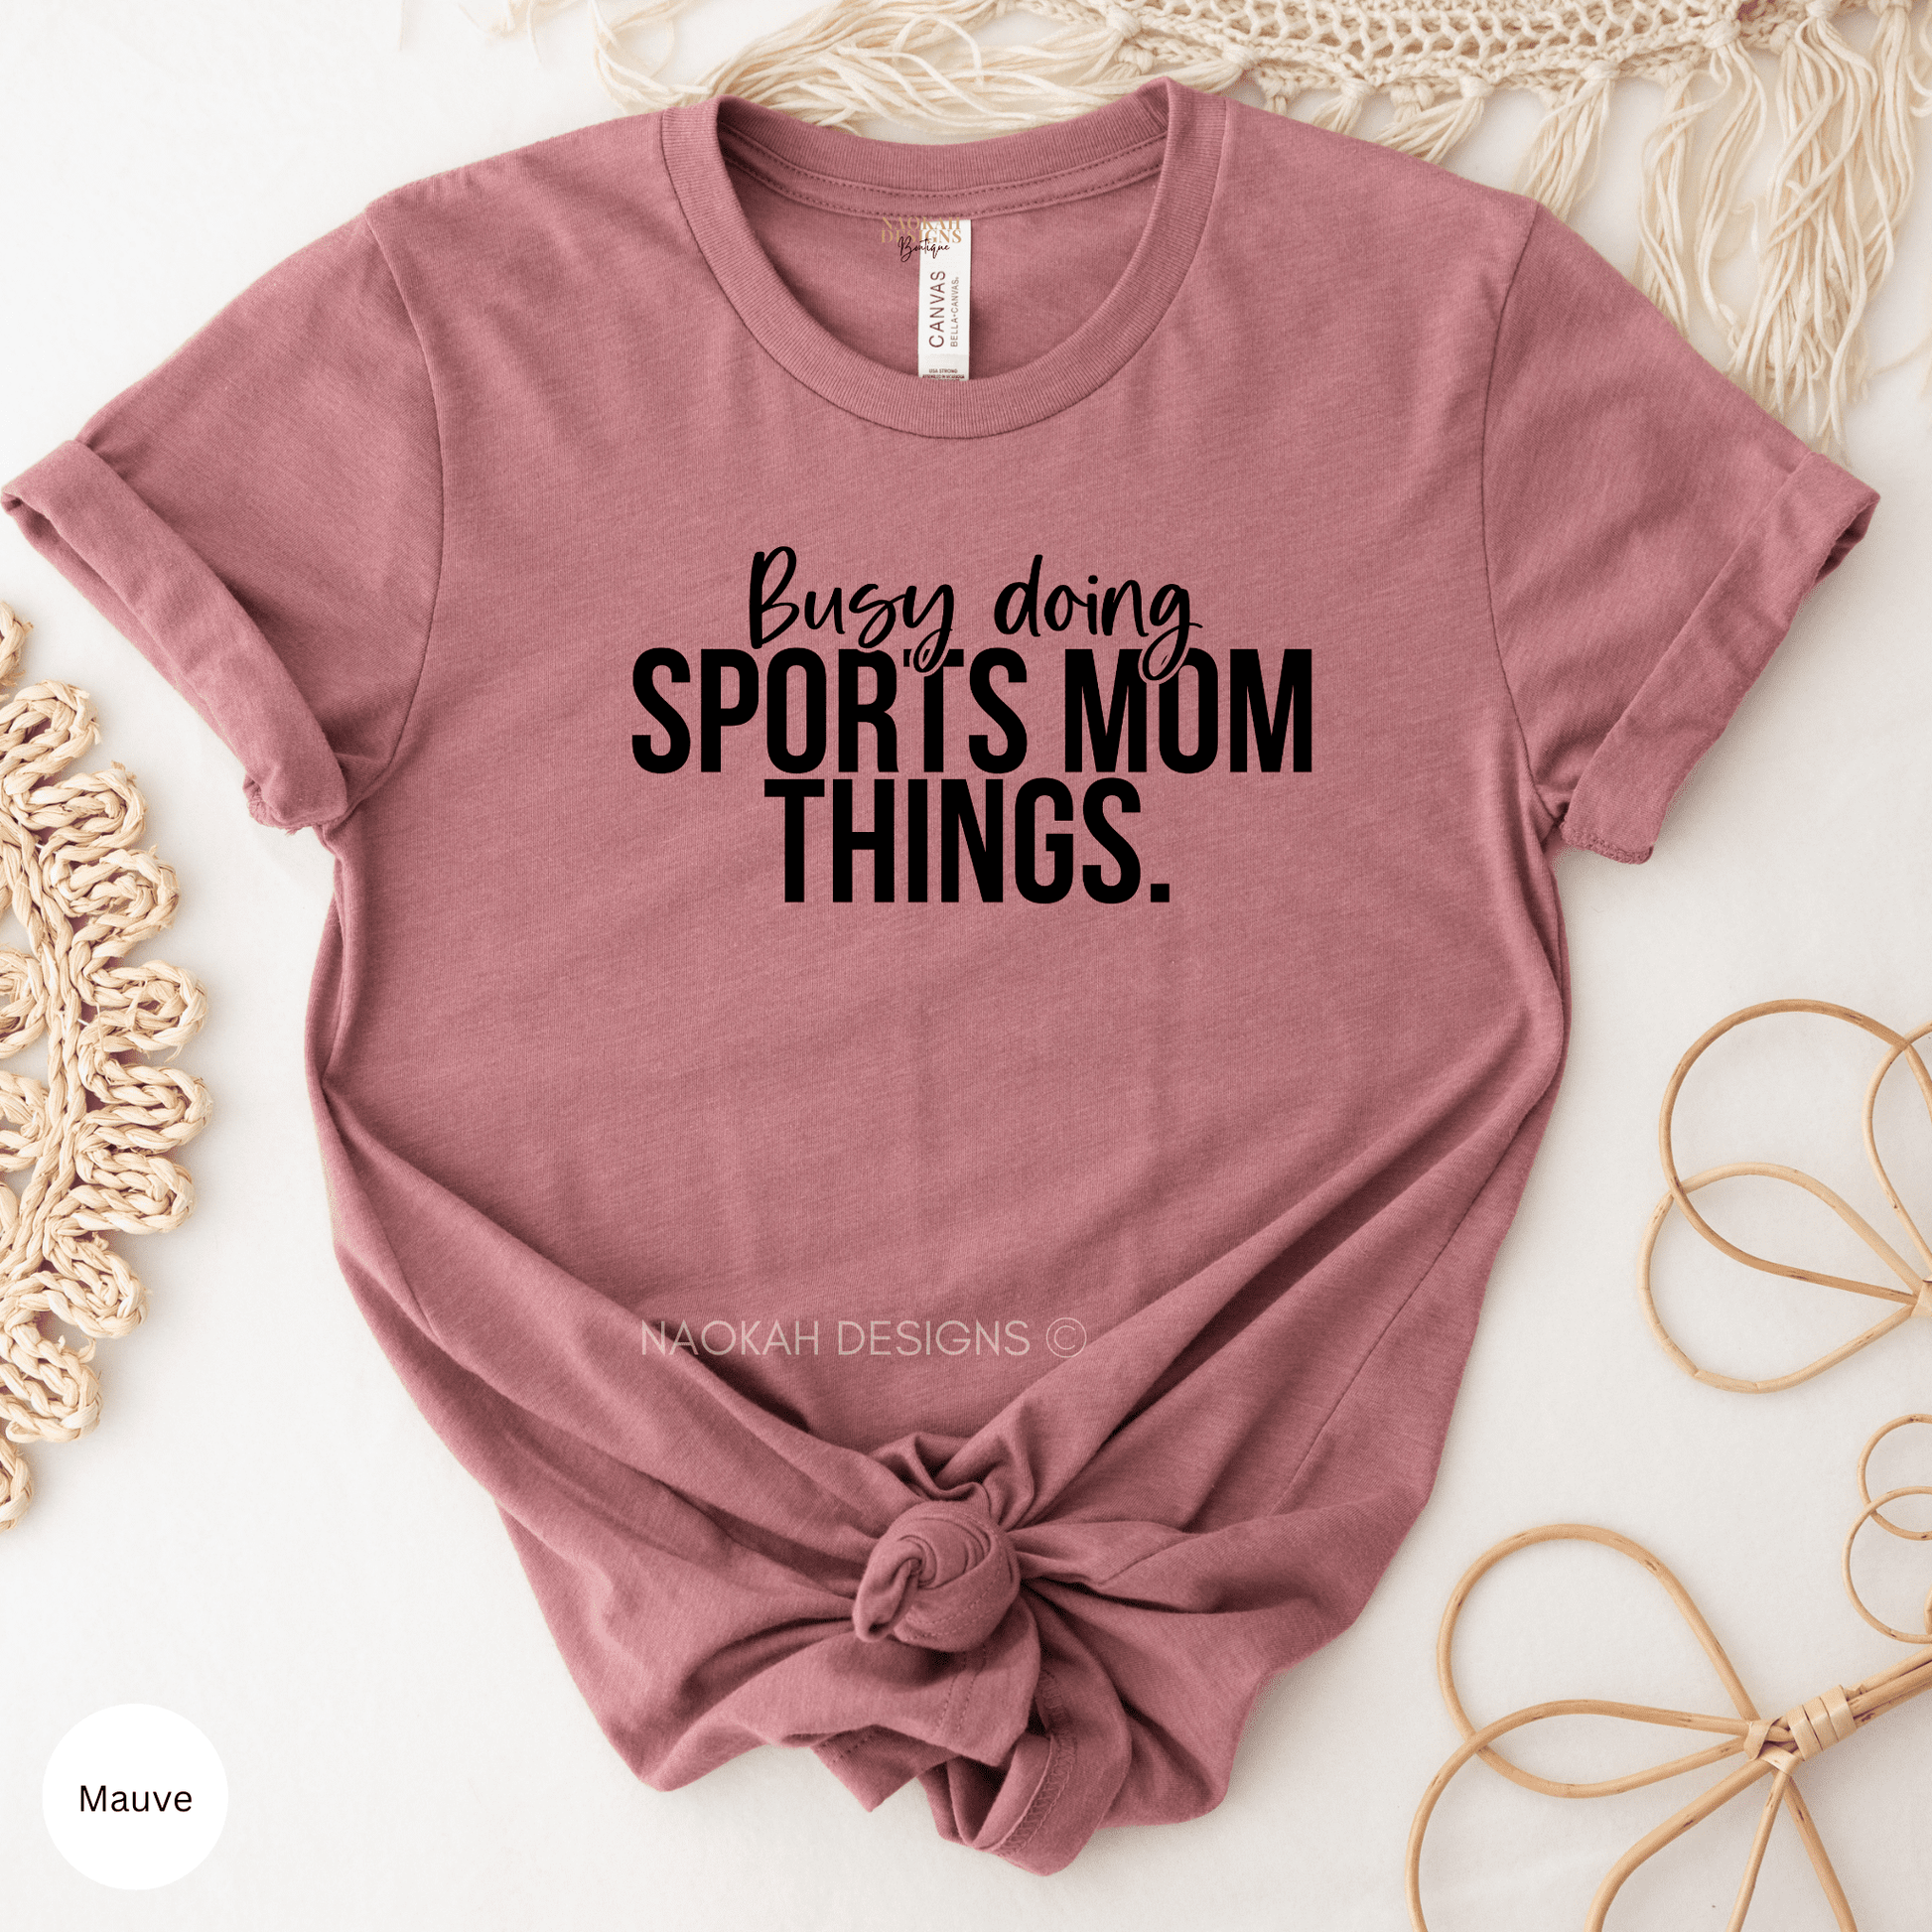 Busy Doing Sports Mom Things Shirt, Gift for Mom, Sports Mom Shirt, Game Day Shirts, Mom Life Shirts, hockey mom shirt, football mom shirt, cheer mom shirt, soccer mom shirt, dance mom shirt, lacrosse mom shirt, karate mom shirt